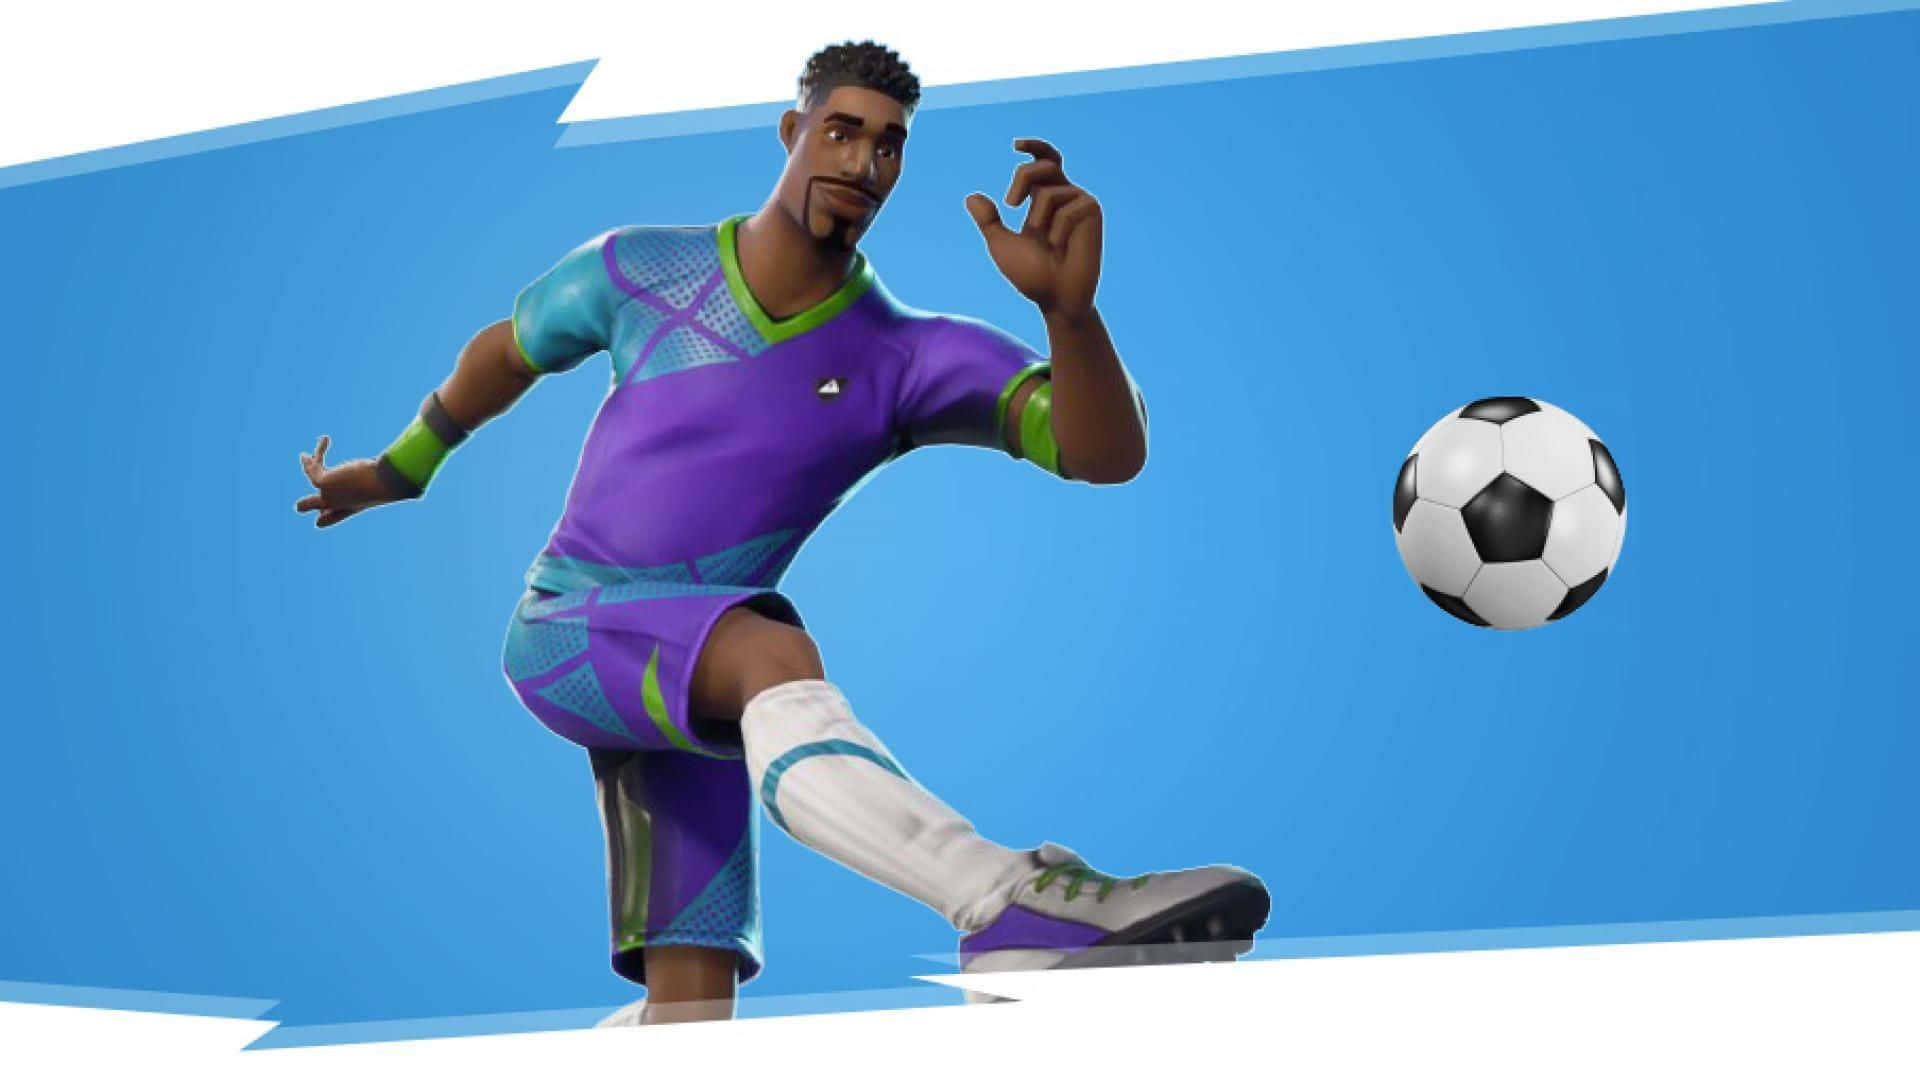 Soccer Skin Get Ready To Play Some "Fortnite"! Wallpaper